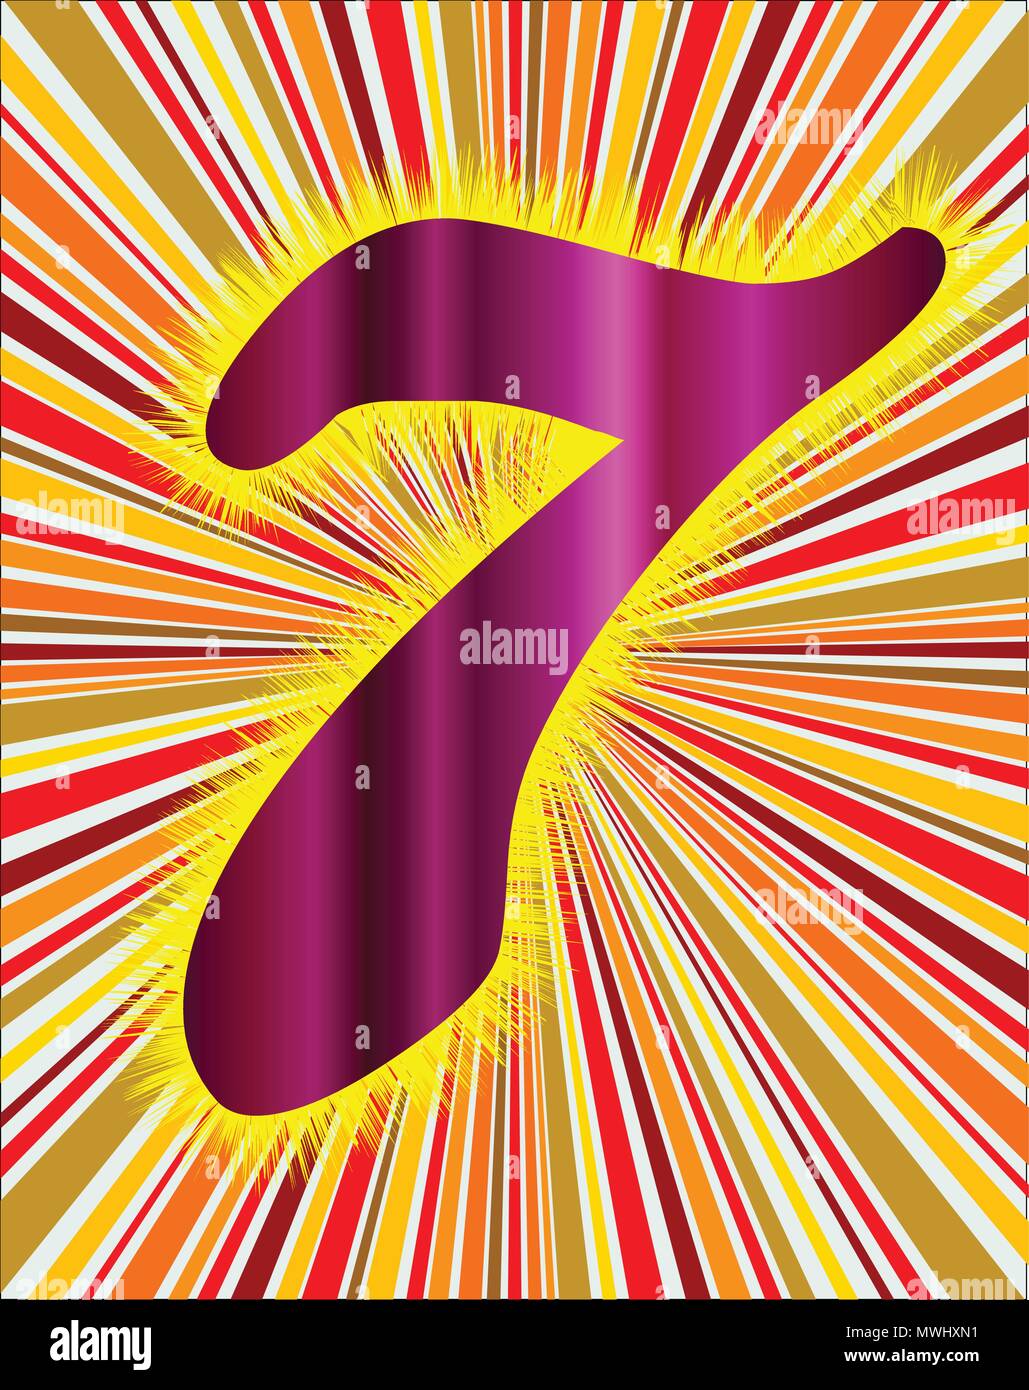 The number 7 normaly asociated with good luck over a bright retro ray background Stock Vector